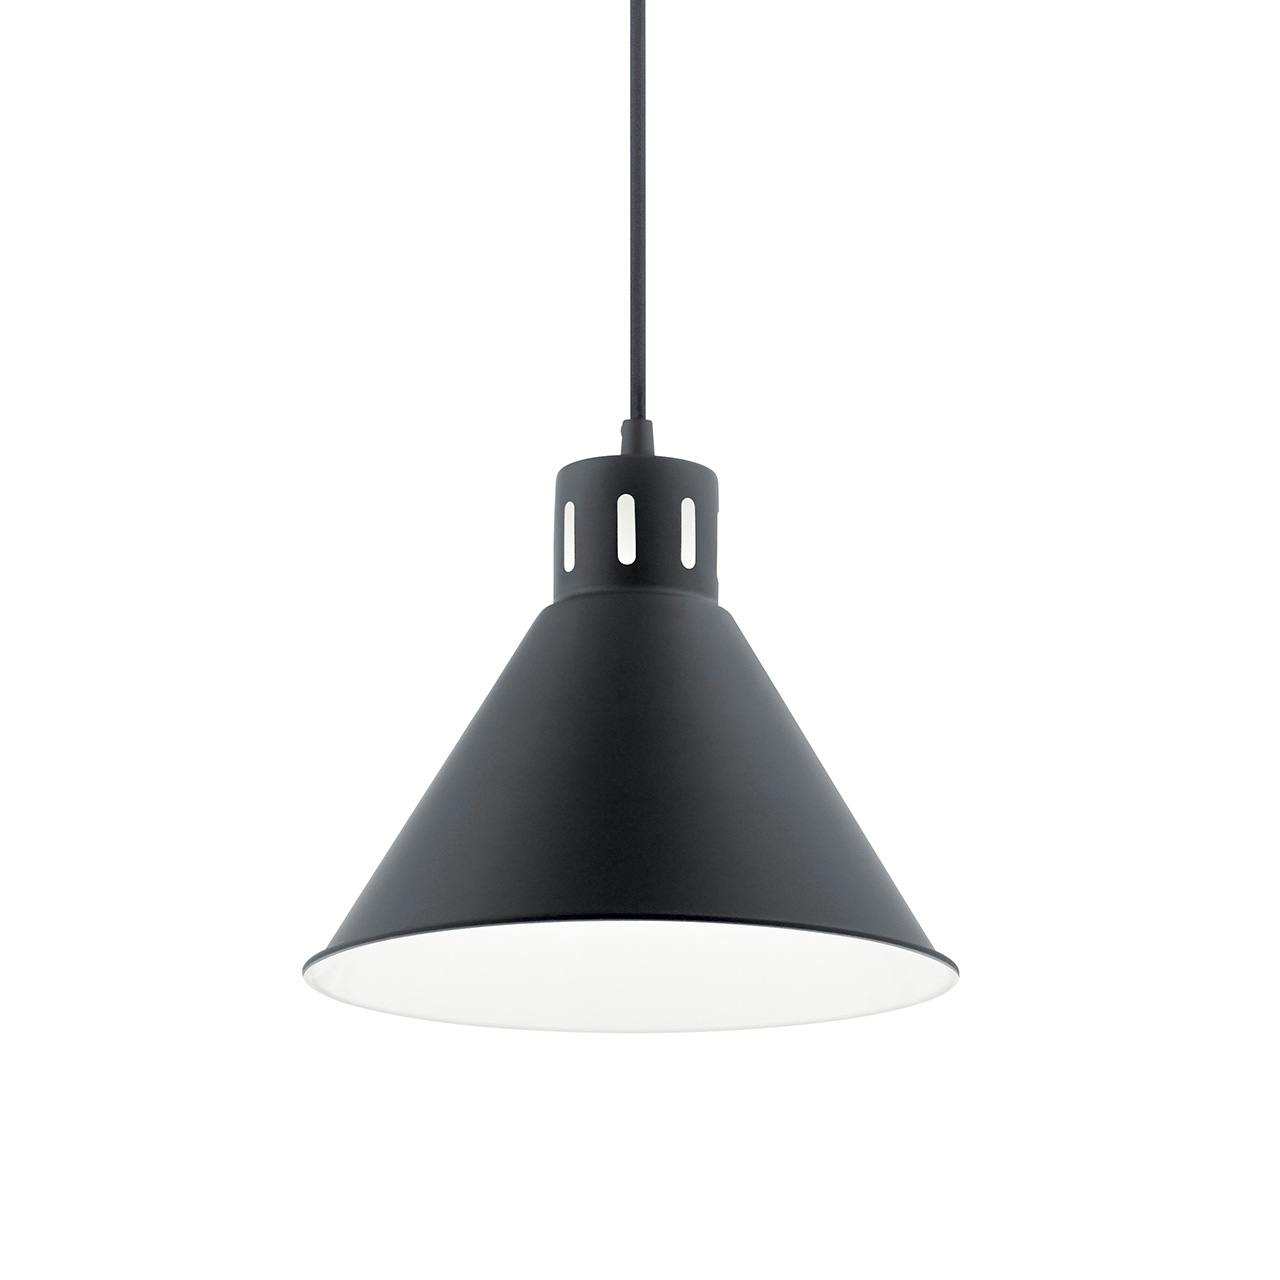 Zailey™ 9.5" 1 Light Pendant in Black without the canopy on a white background